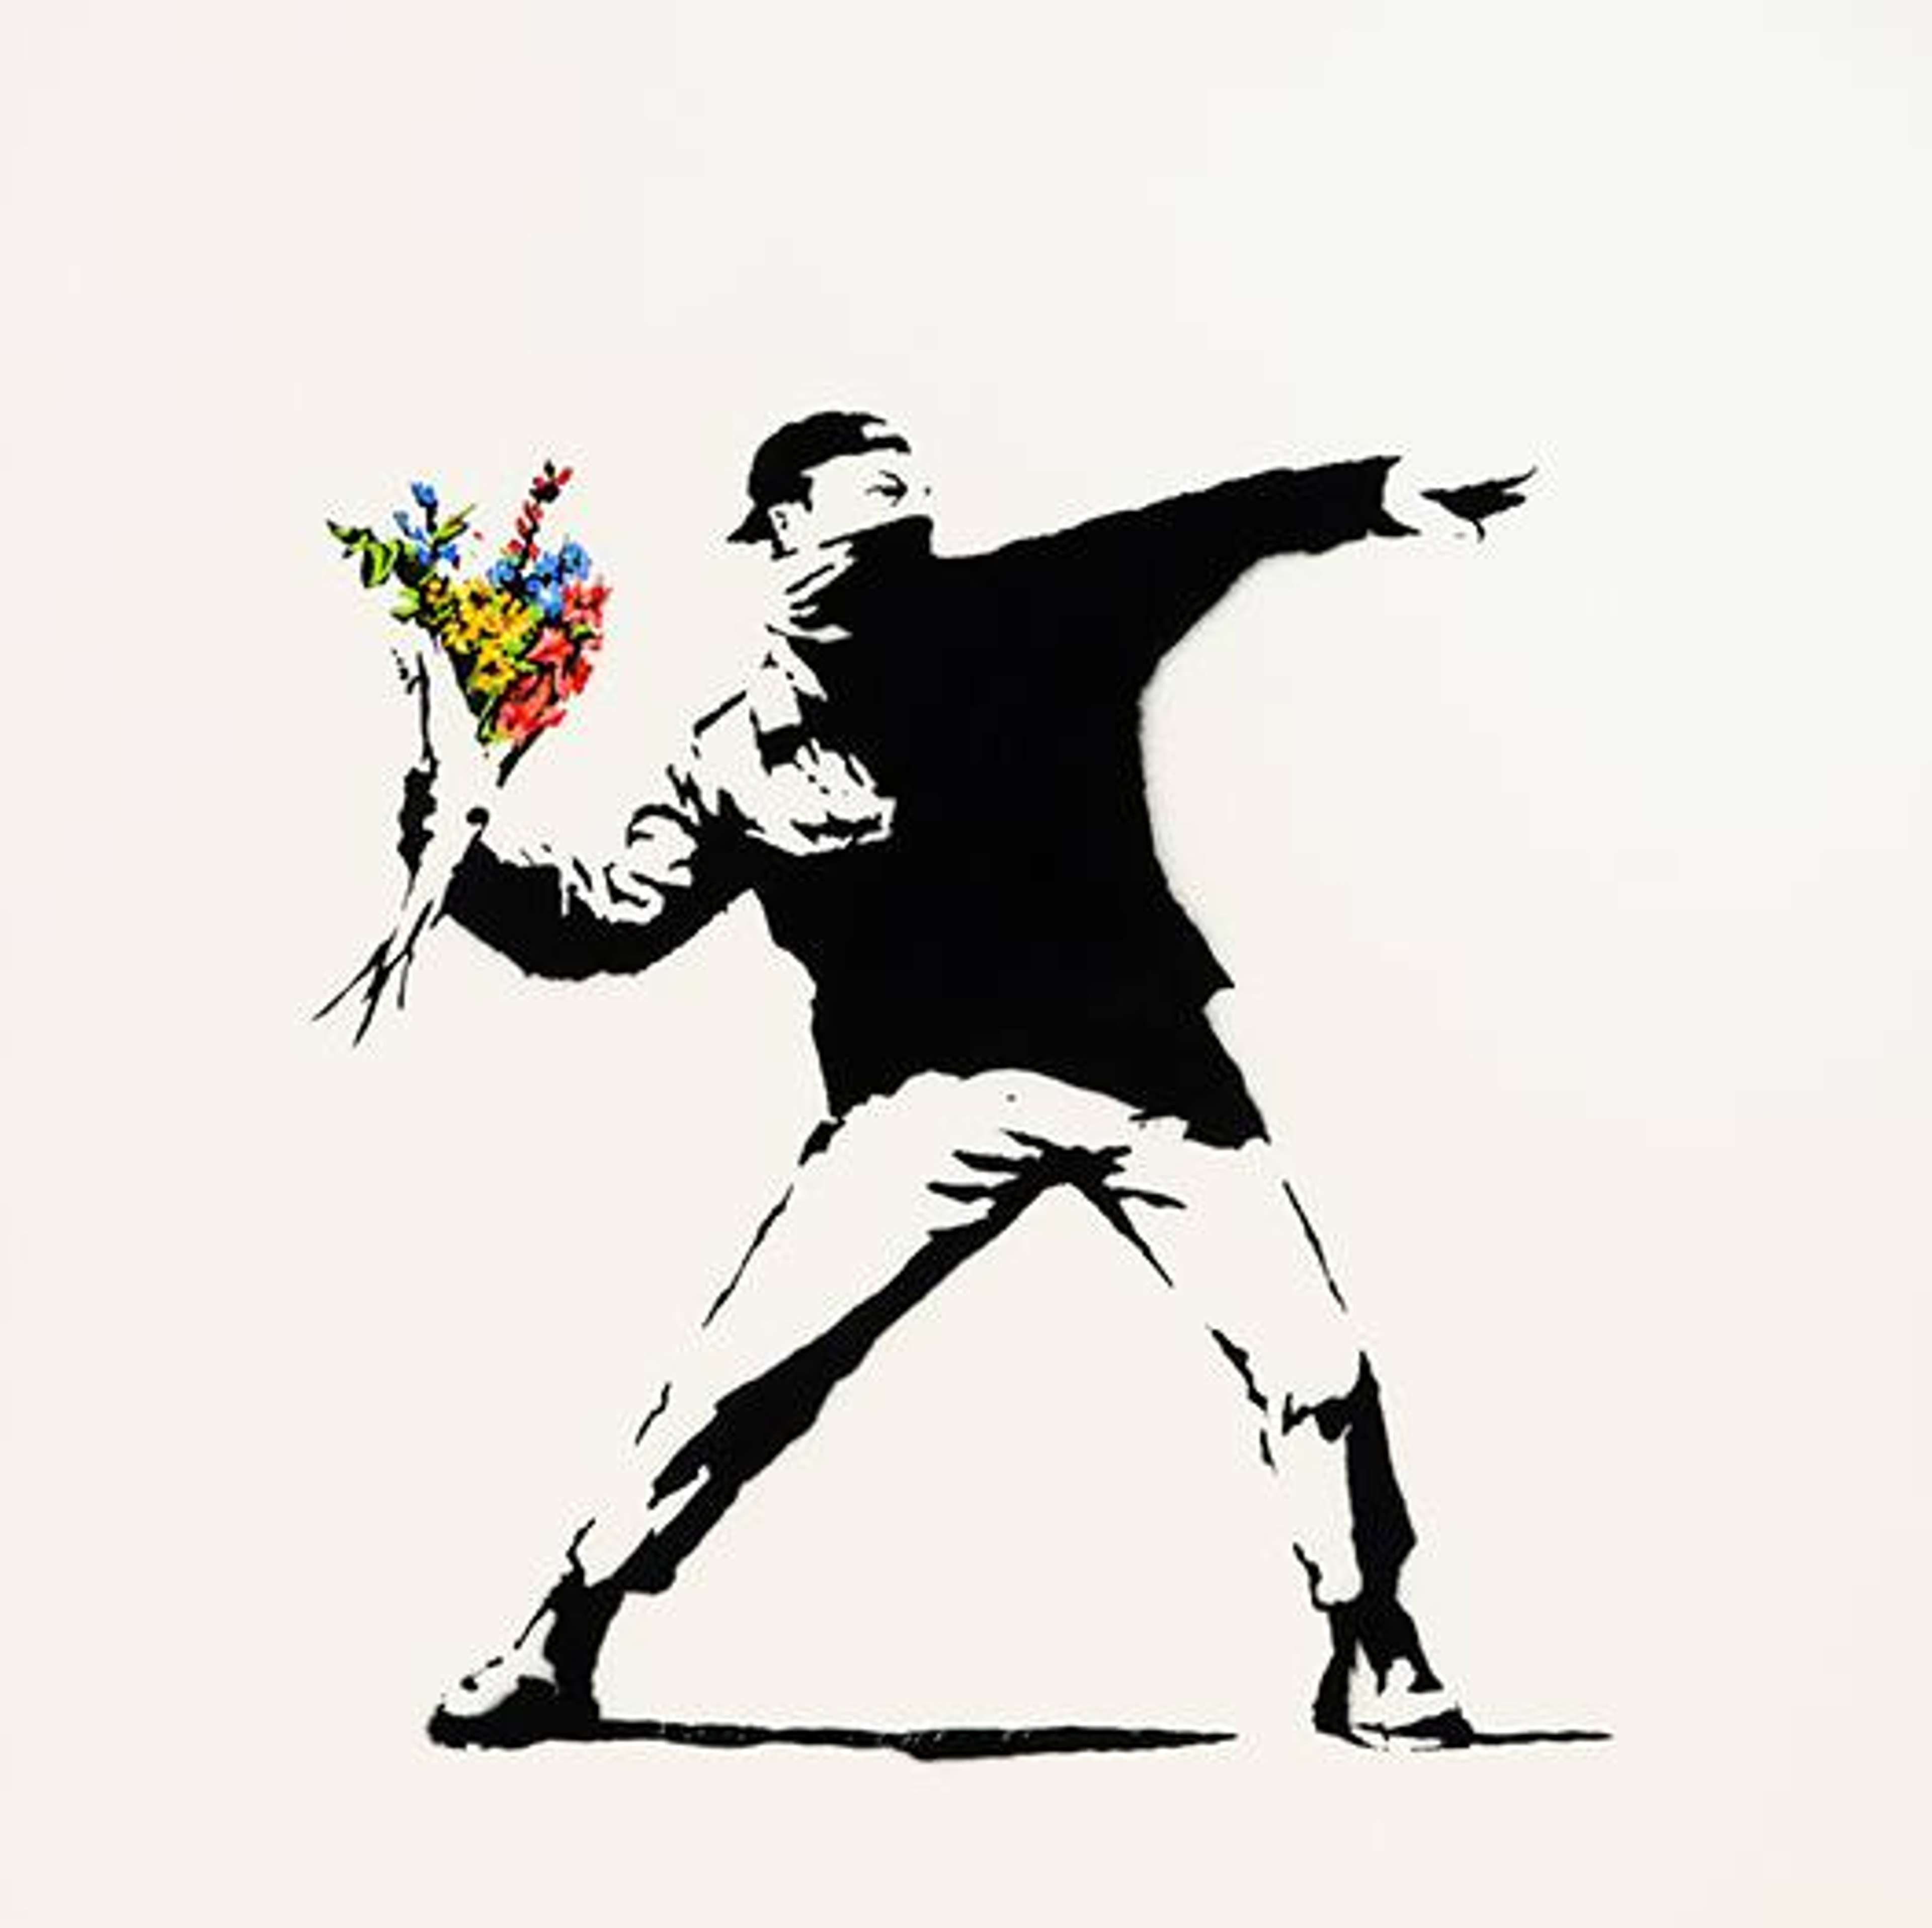 Love Is In The Air by Banksy - © Sotheby's